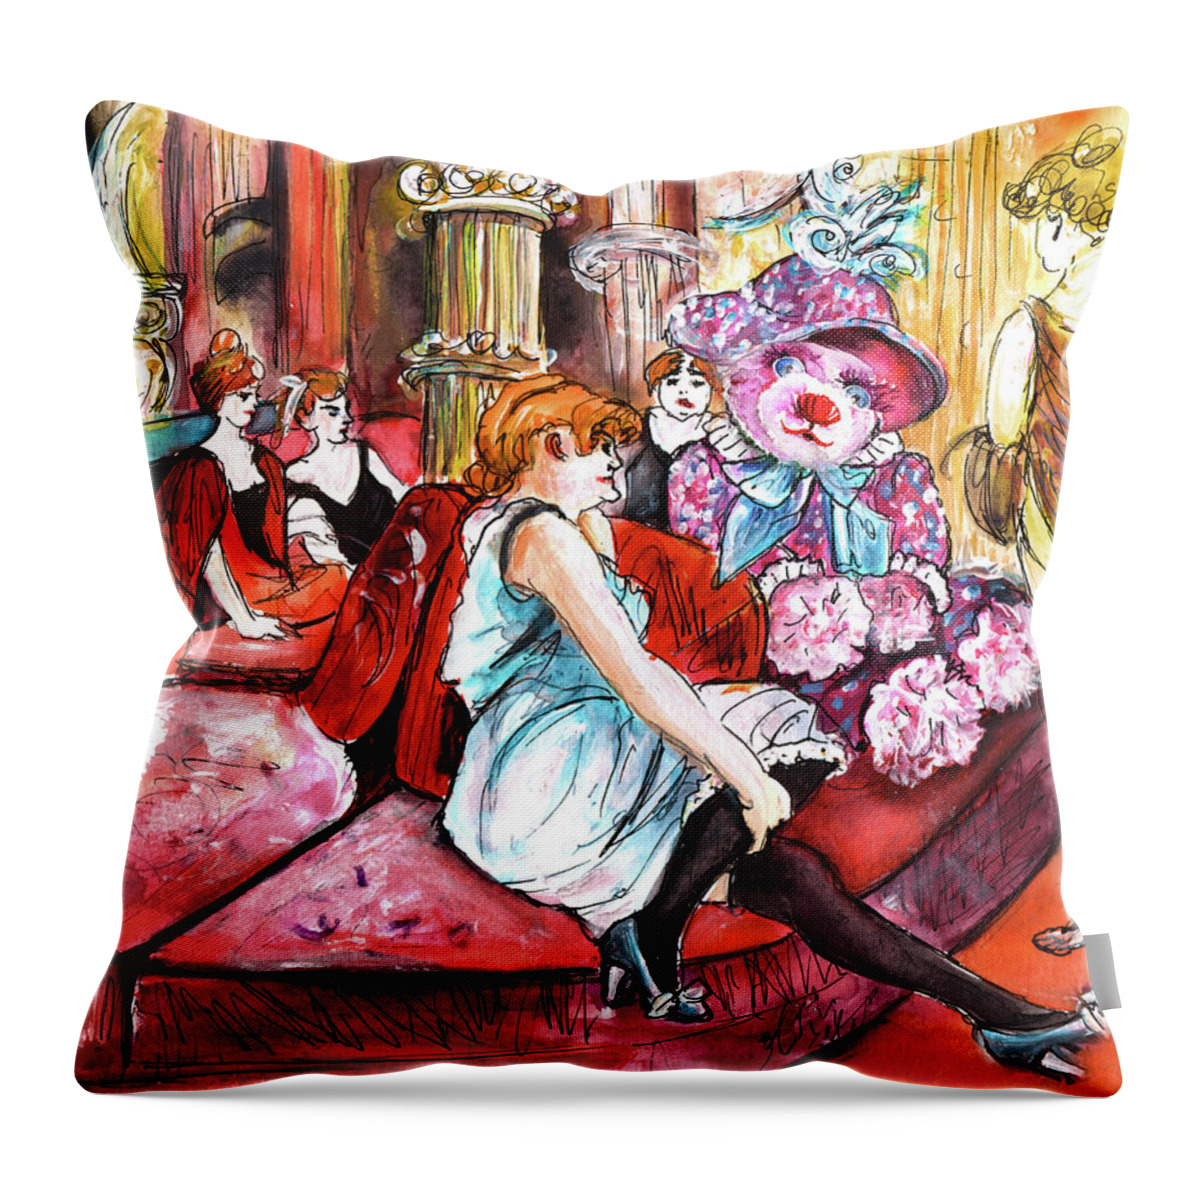 Truffle Mcfurry Throw Pillow featuring the painting Bearnadette In The Salon Rue Des Moulins In Paris by Miki De Goodaboom